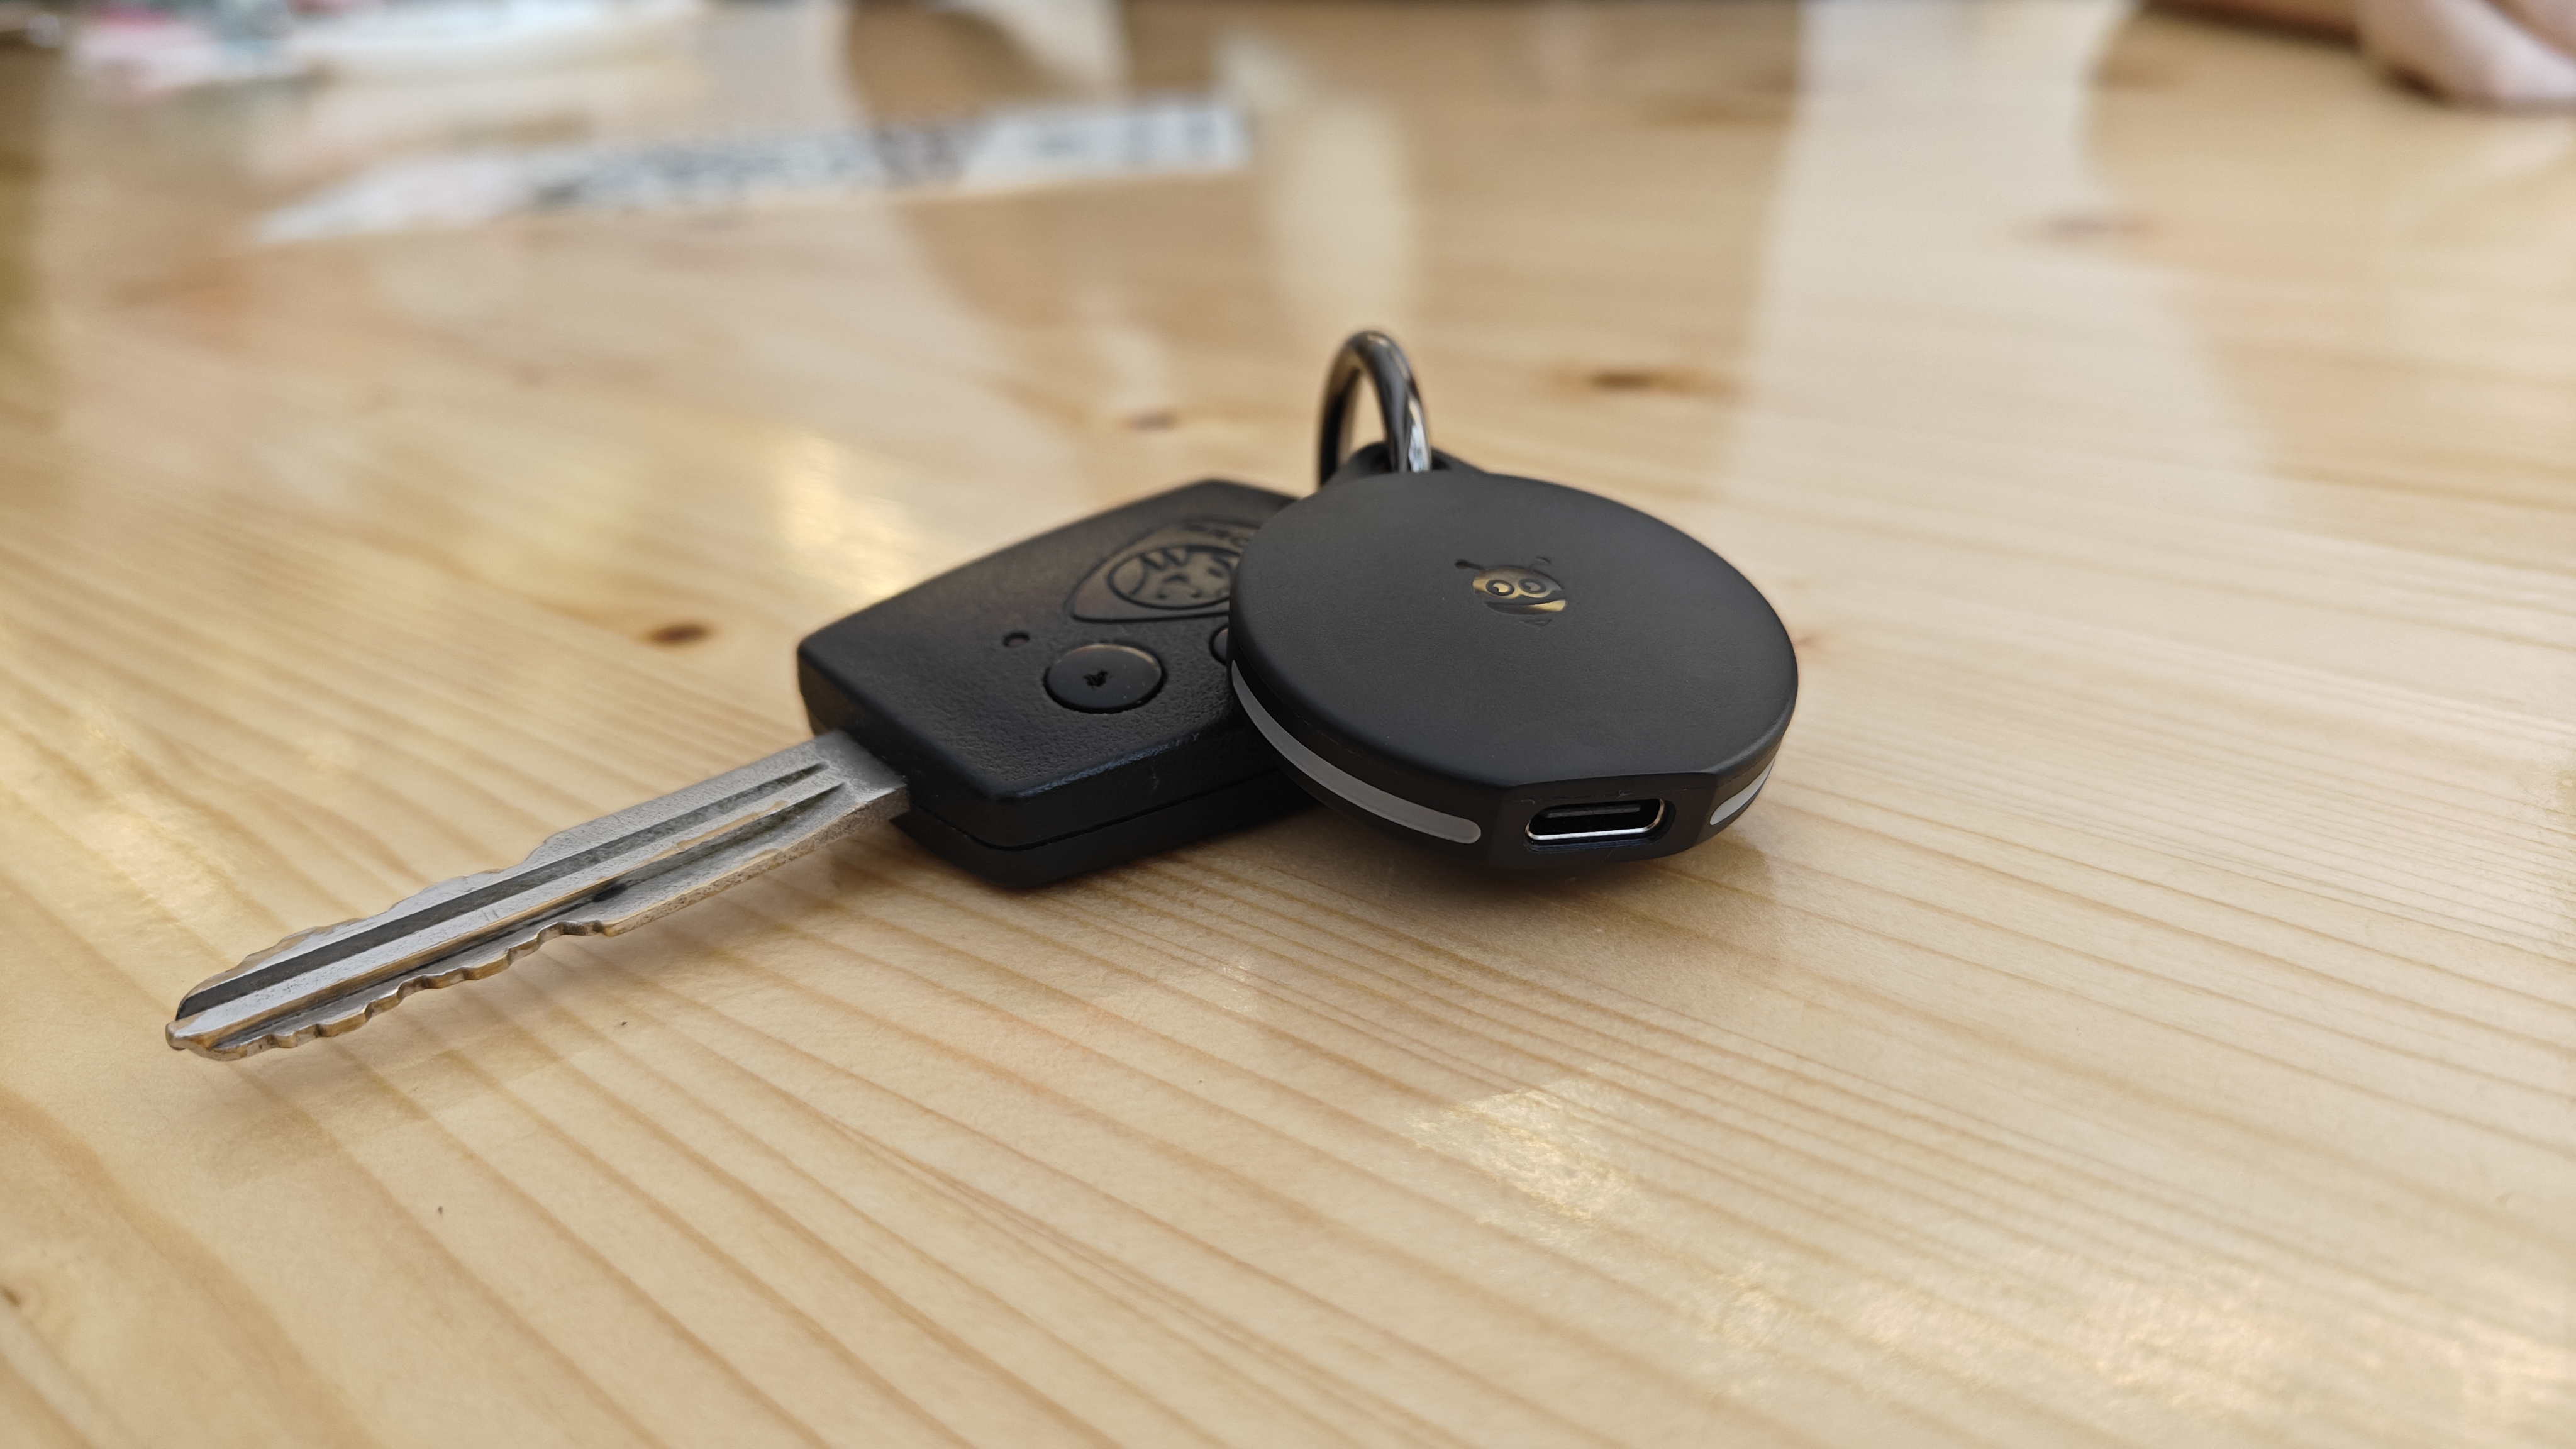 Pebblebee Clip Bluetooth locator compatible with Google Find My Device on your car key.